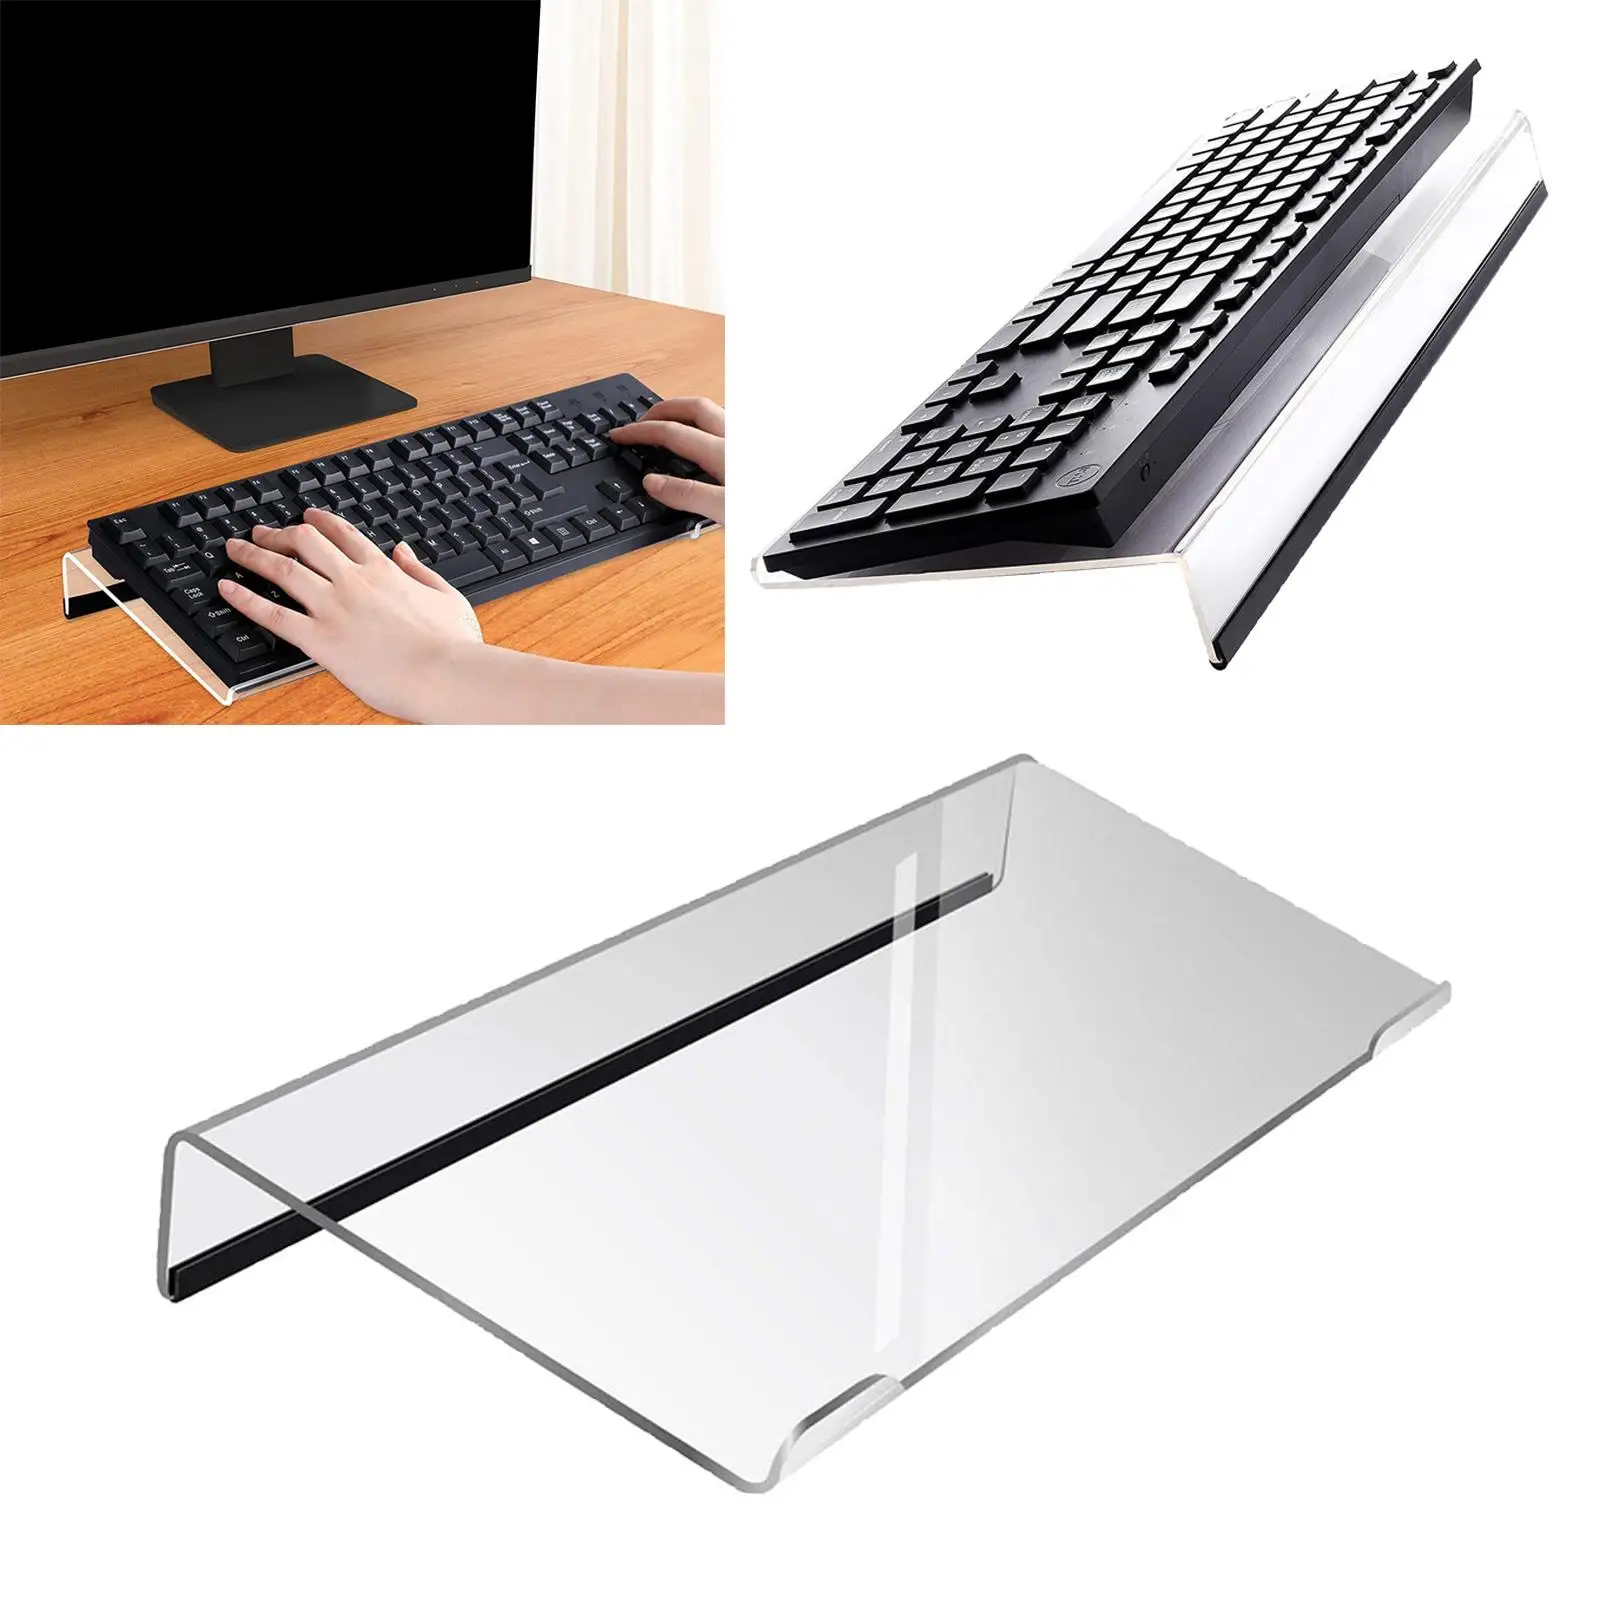 Computer Keyboard Stand Keyboard Storage Small Computer Keyboard Tray Acrylic Keyboard Holder for Working Office Daily Use Desk